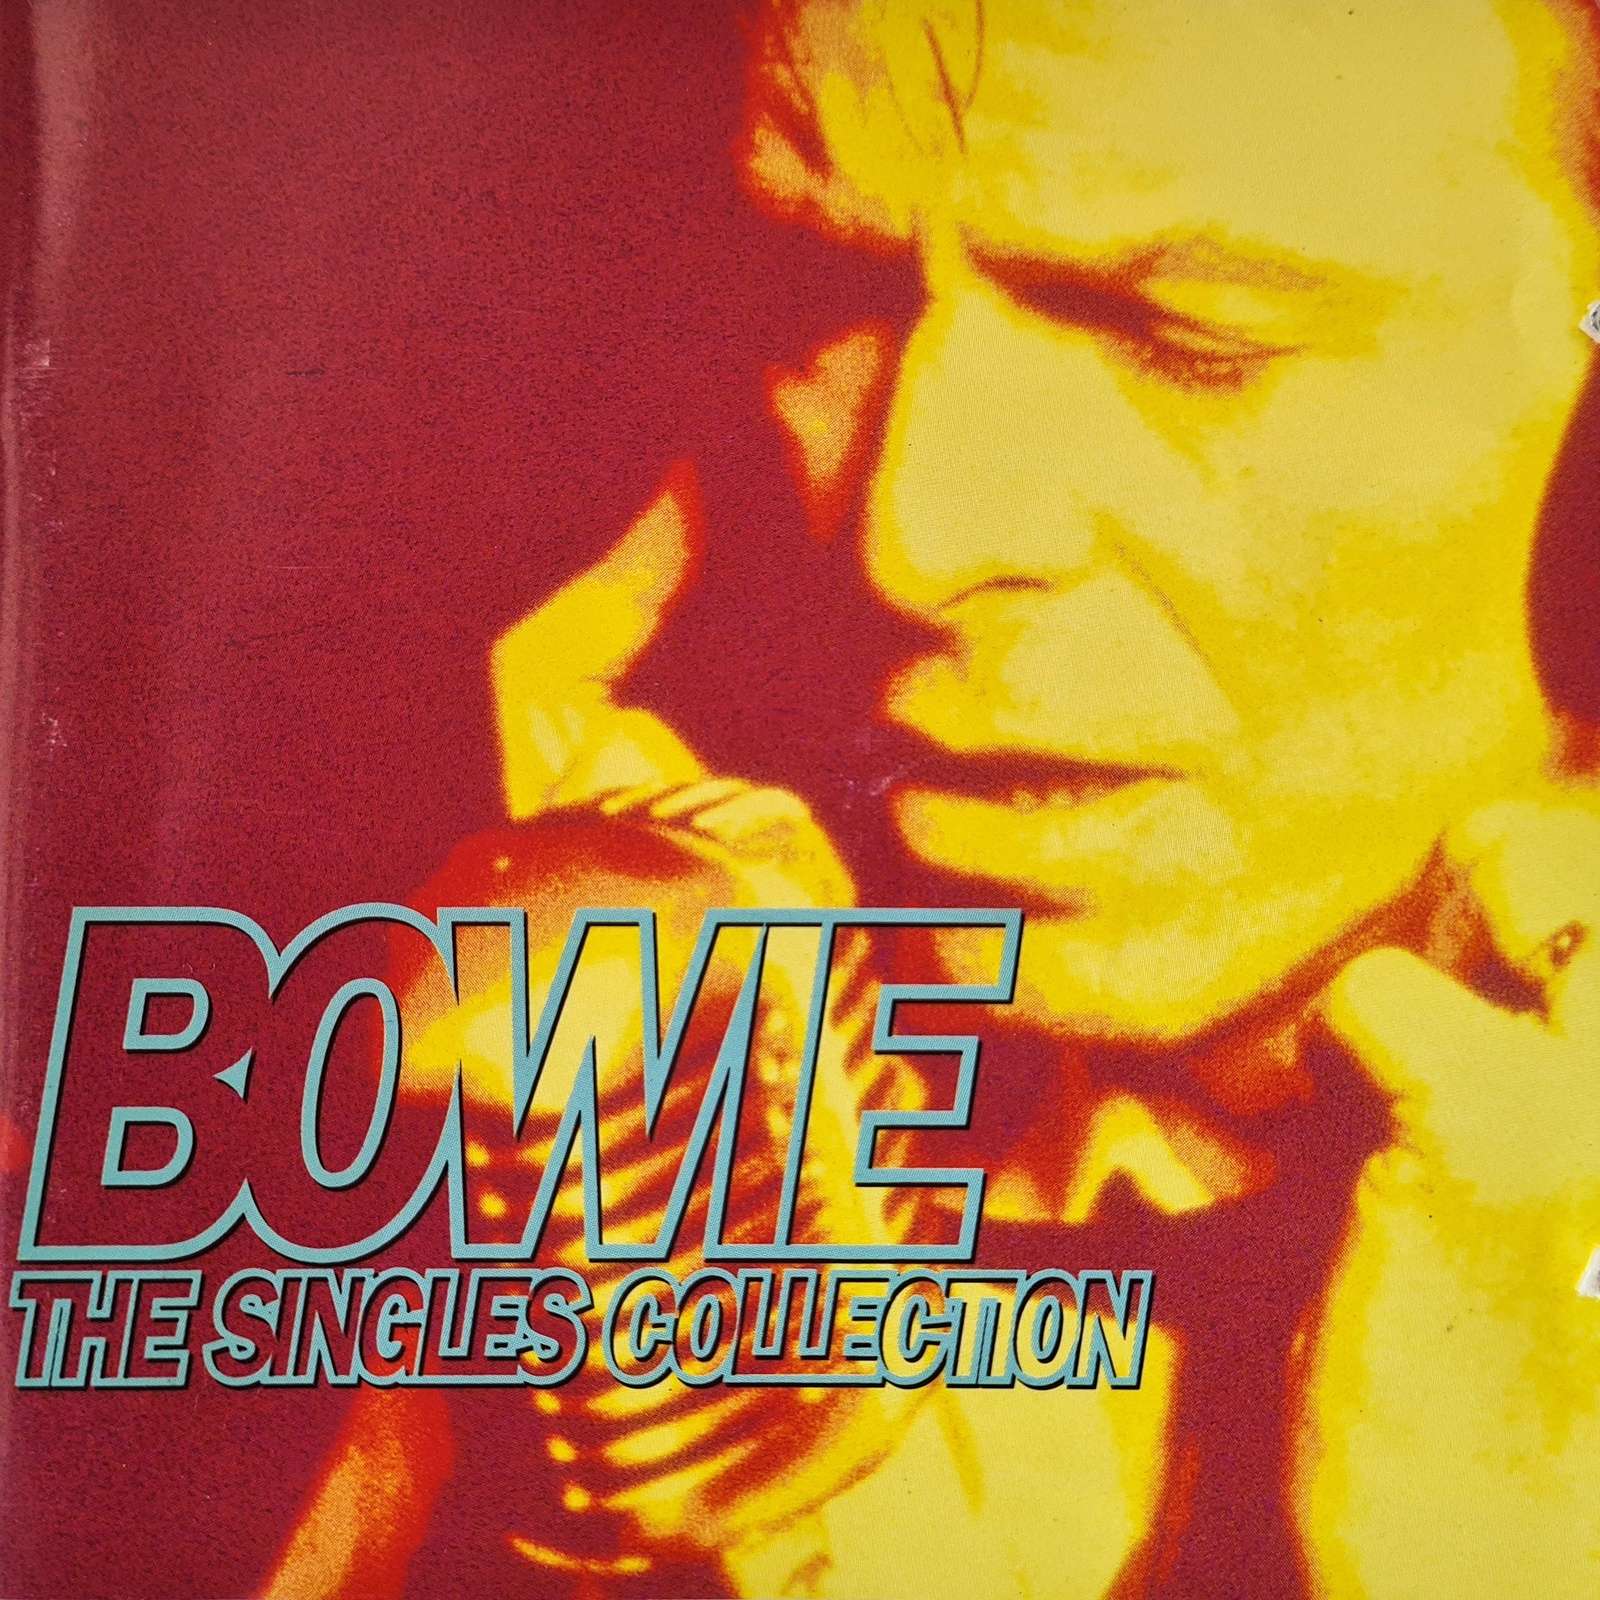 David Bowie - The Singles Collection (CD)